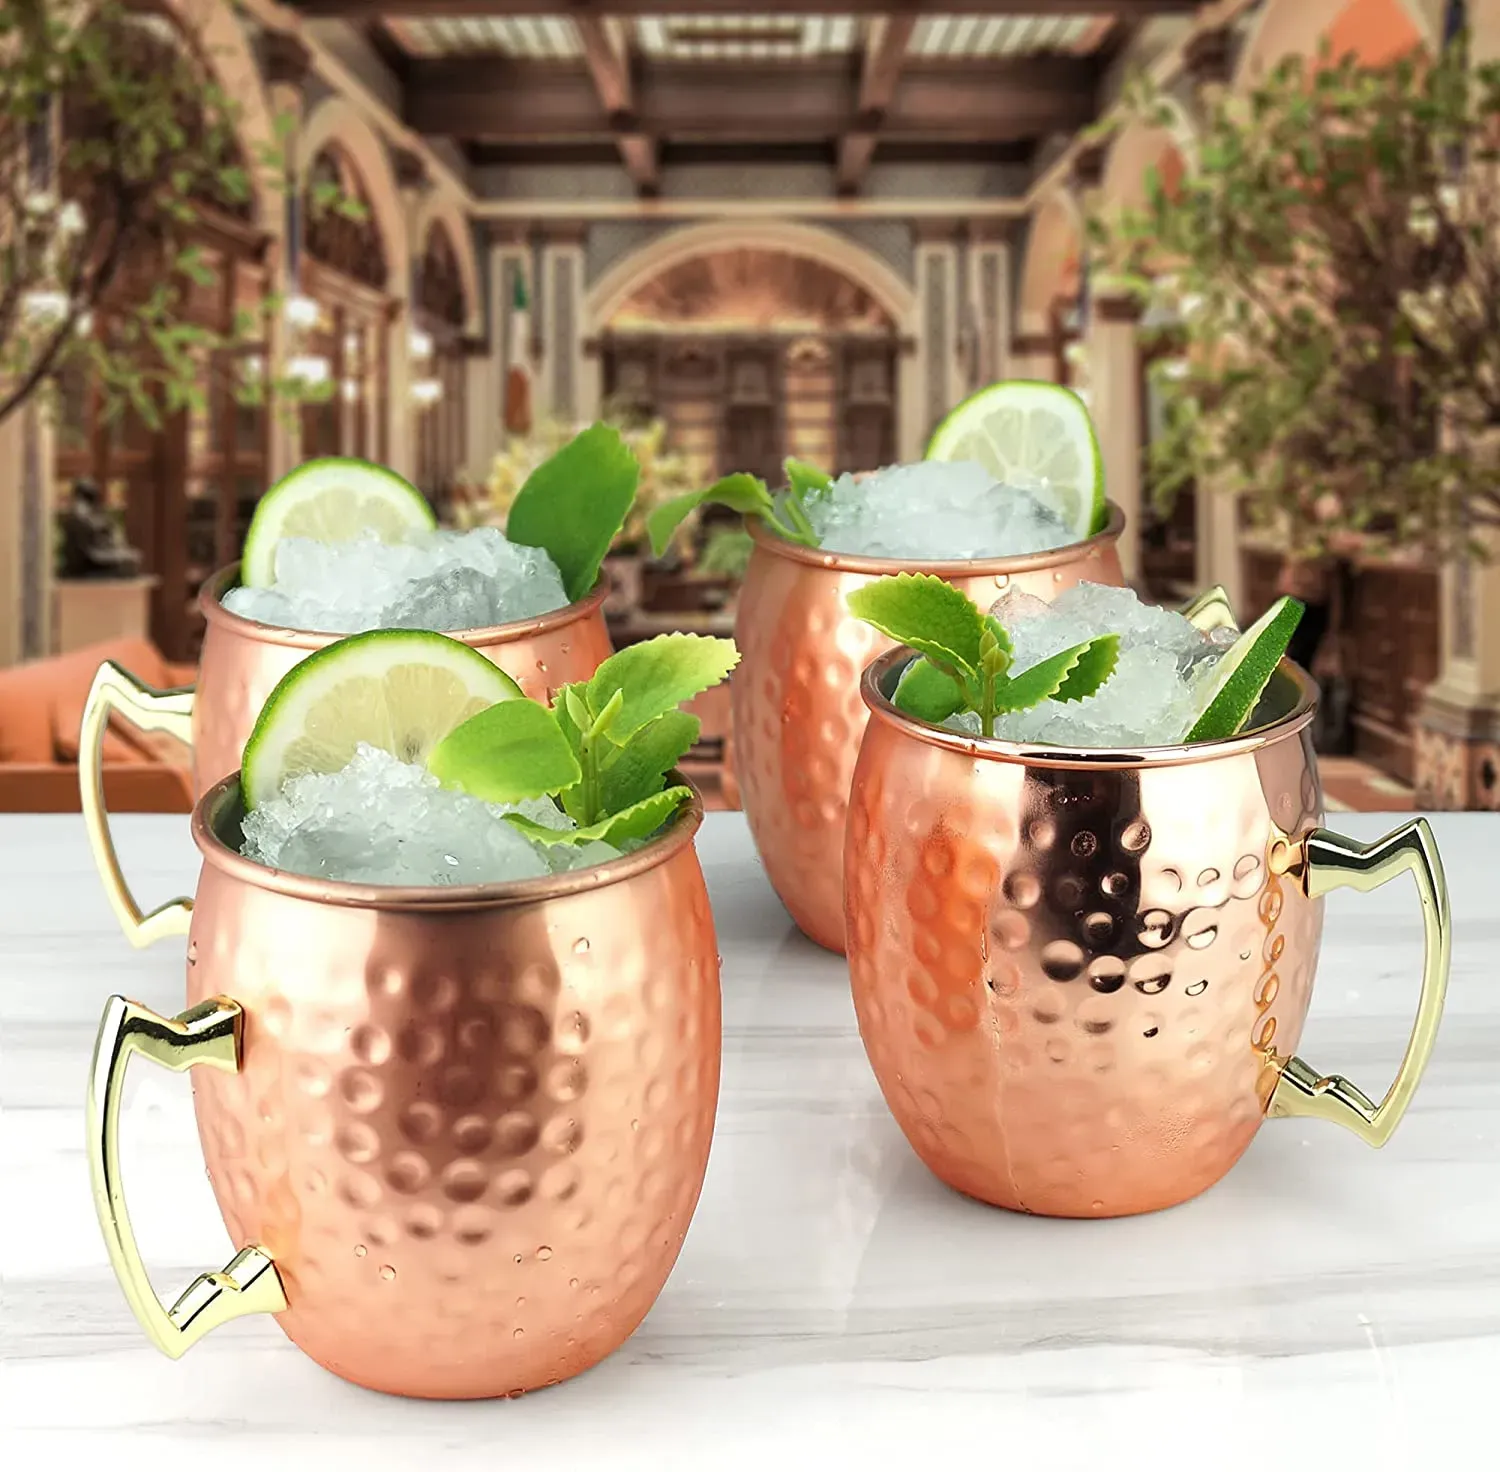 Moscow Mule Mugs Large Size 19oz 530ml Hammered Cups Stainless Steel Lining Pure Copper Plating Gold Brass Handles 3.7 inches Diameter x 4 inches Tall C0630x12